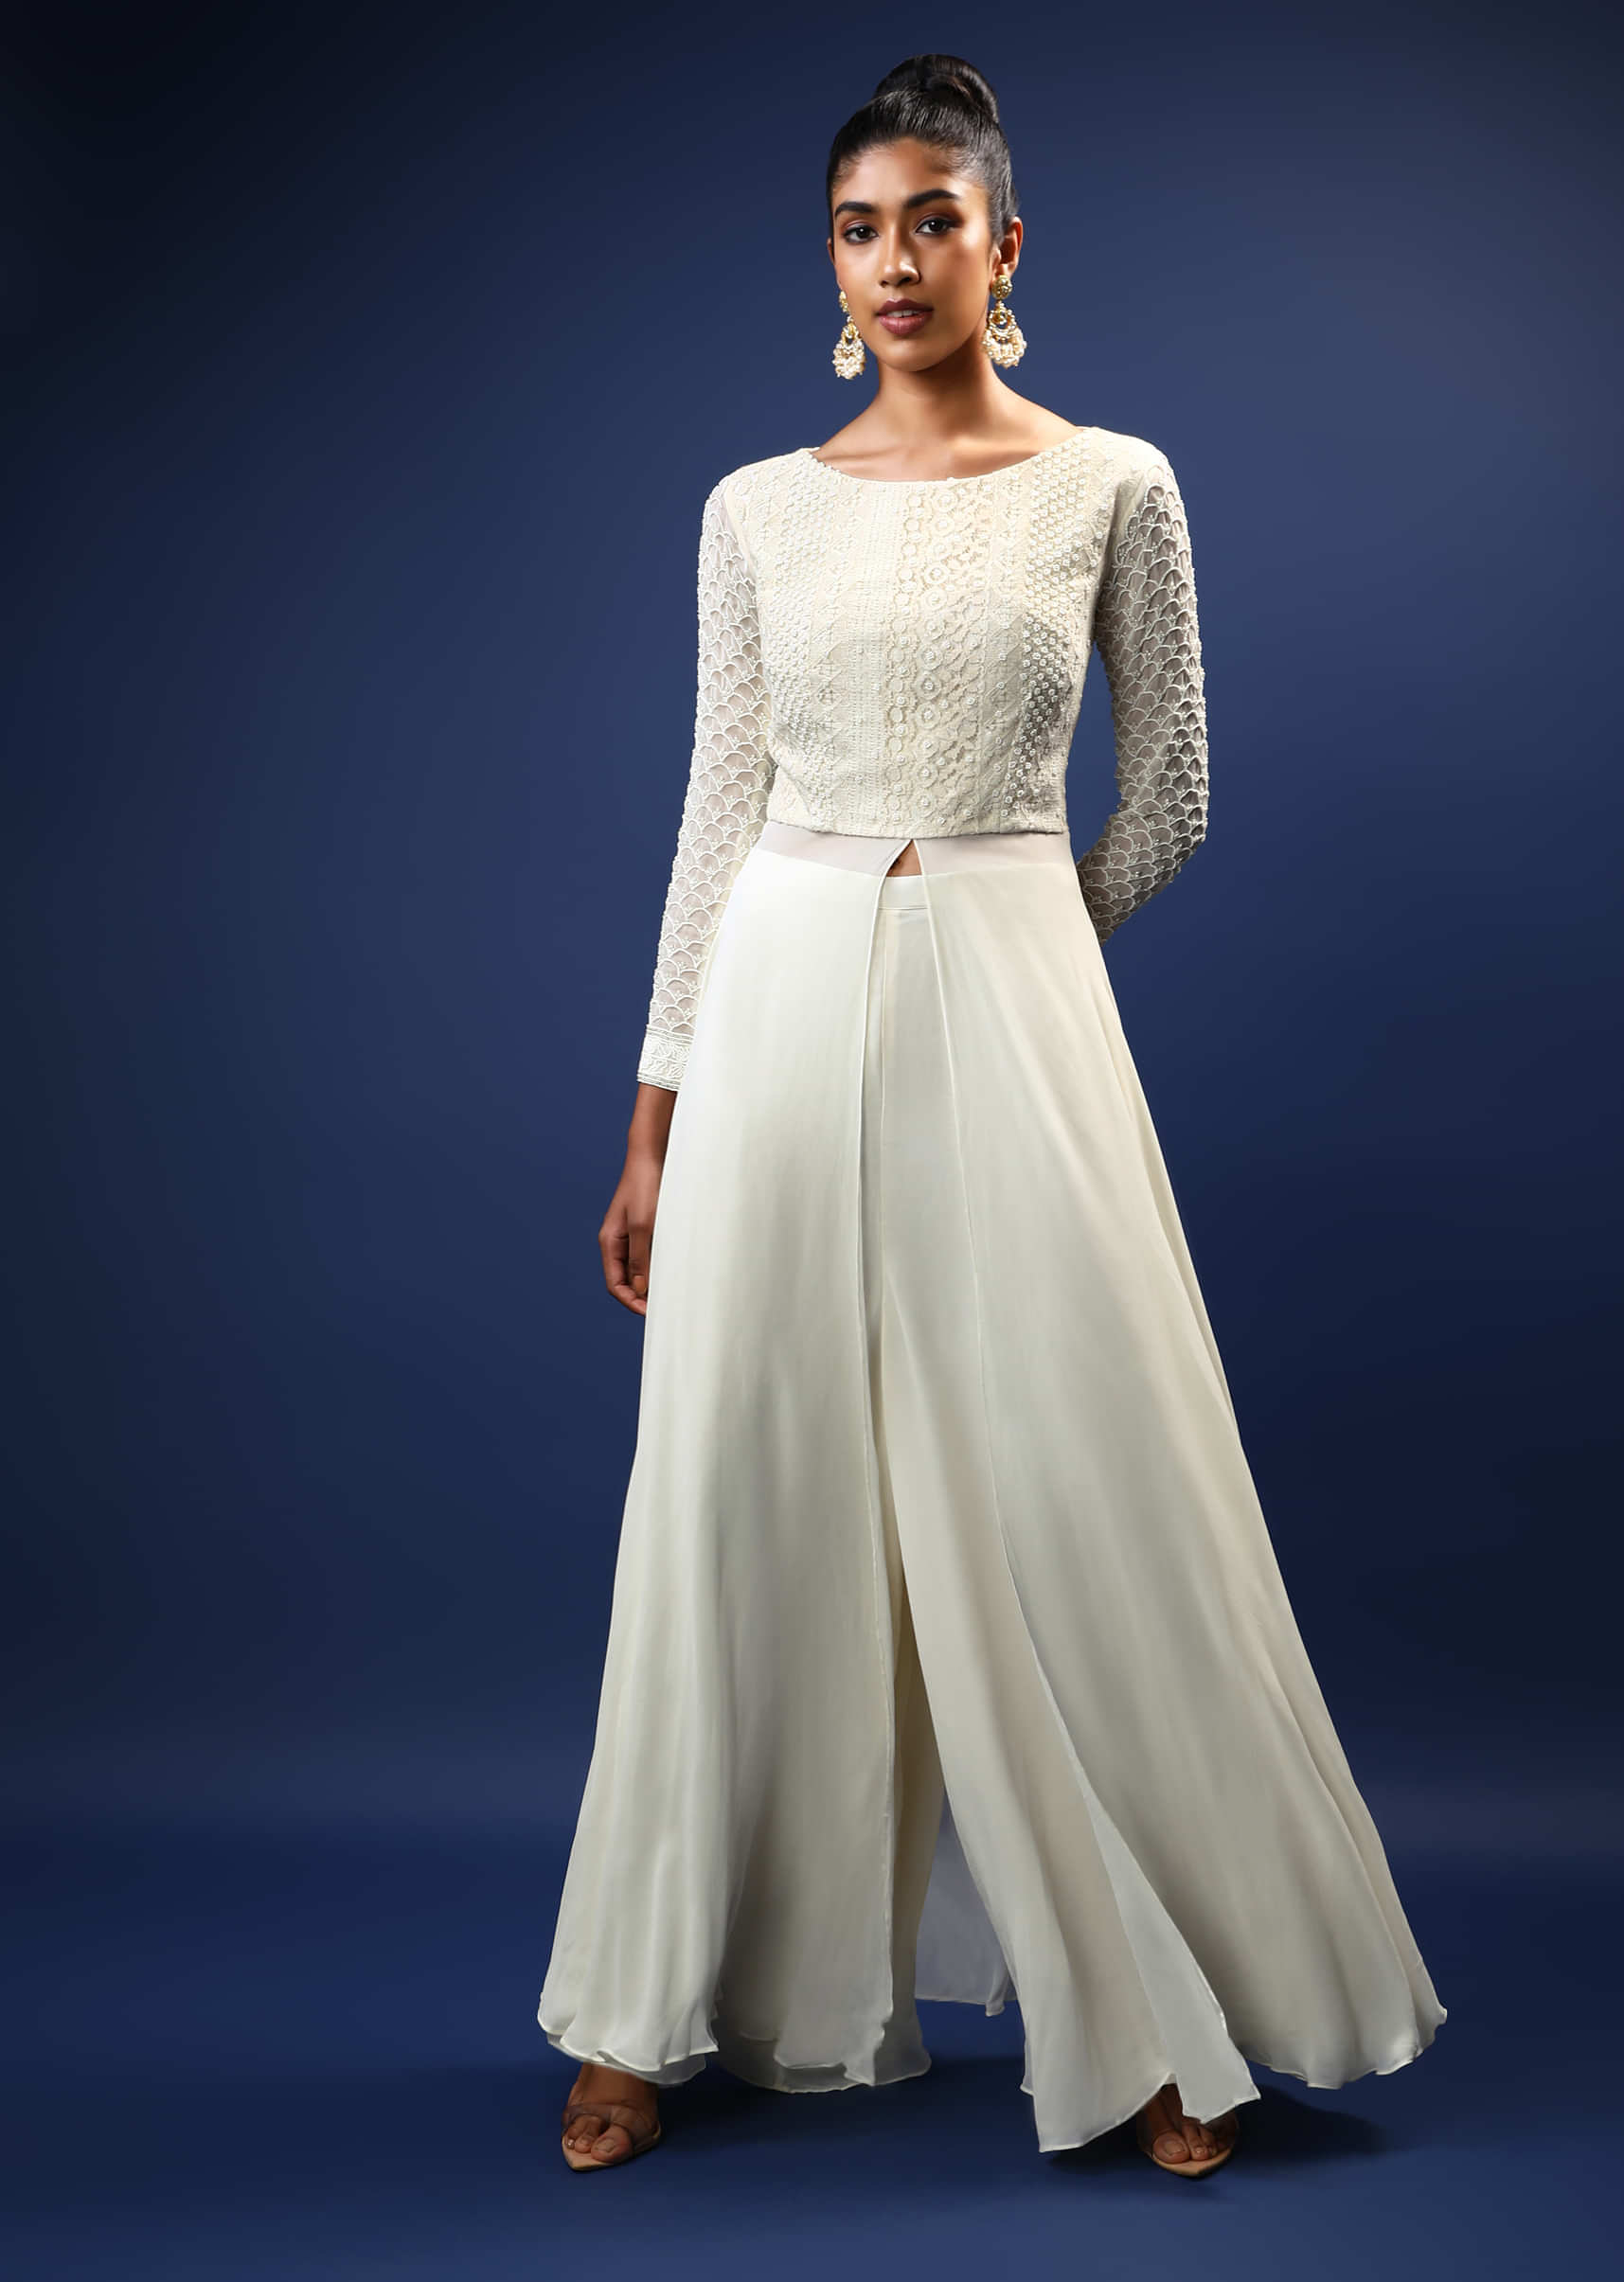 Daisy White Palazzo Suit In Georgette With A Long Slit Top In Crochet Lace Adorned In Moti Bead Detailing  